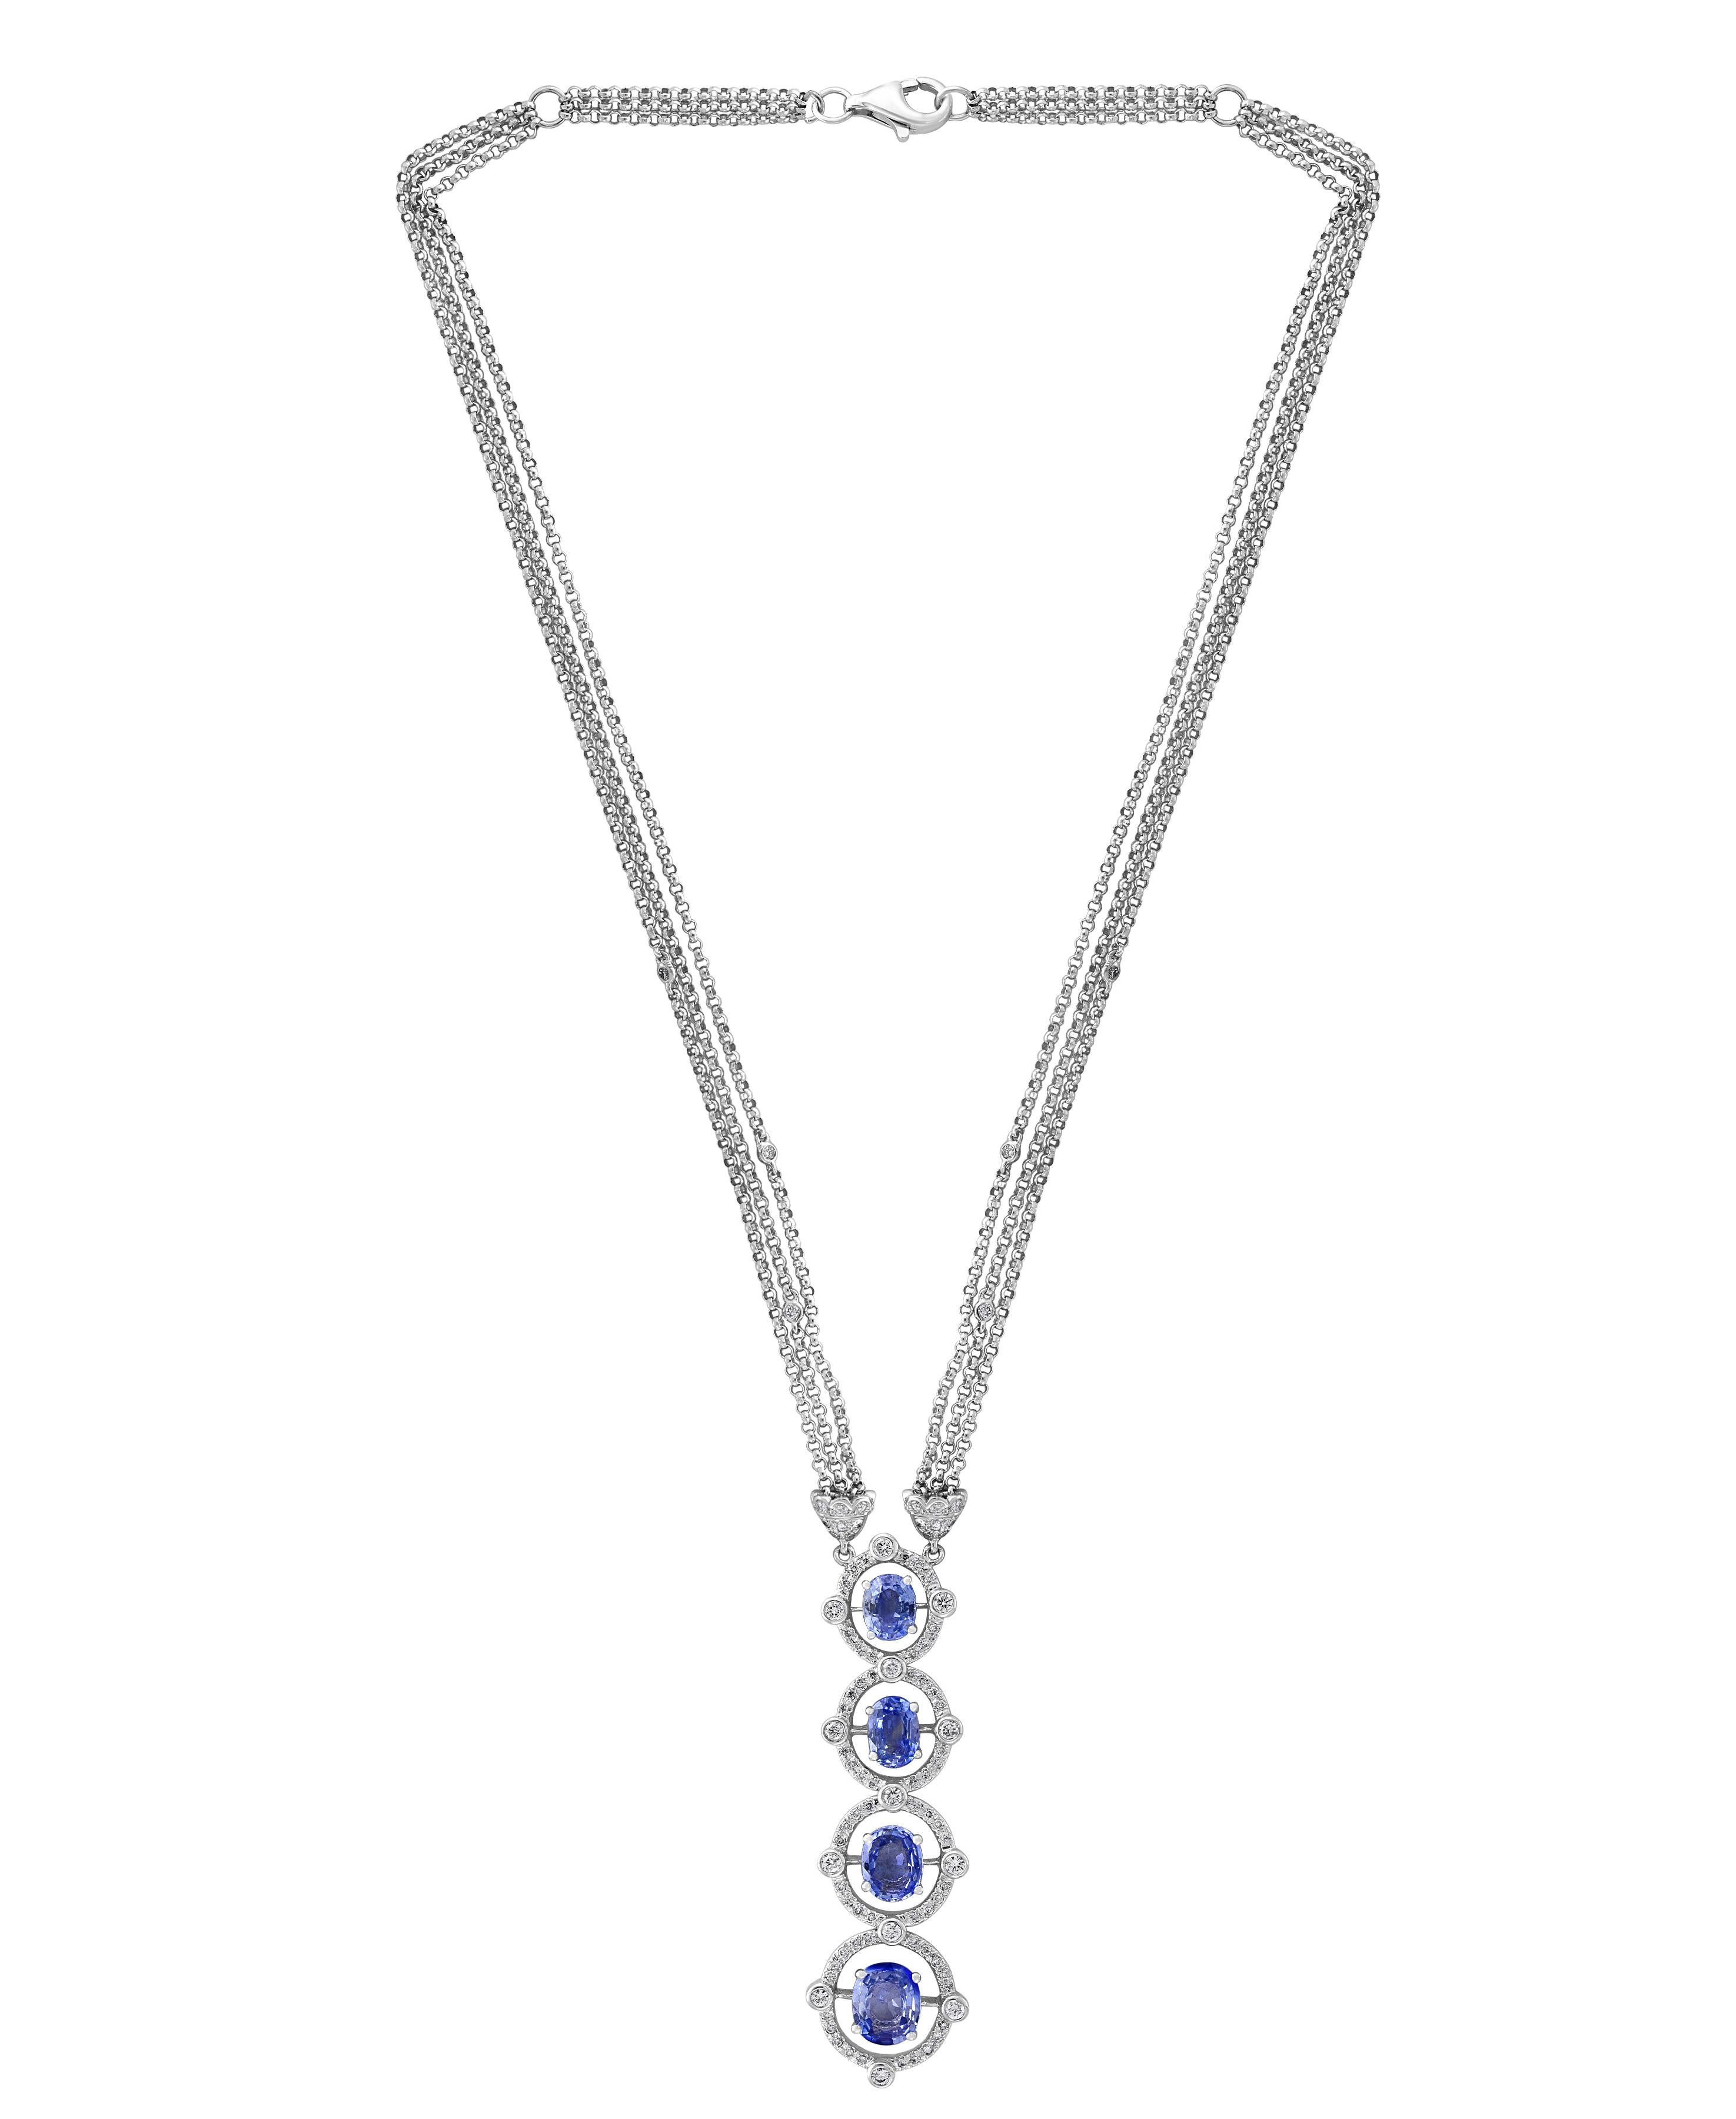 7 carats of fine  quality of  Natural Sapphire  pendant surrounded by brilliant round  cut Diamonds all mounted in 18 karat White  gold. Weight of the necklace is 19 Grams . 
Sapphire  Weight approximately 7 Carats
Diamond Weight approximately 2.5